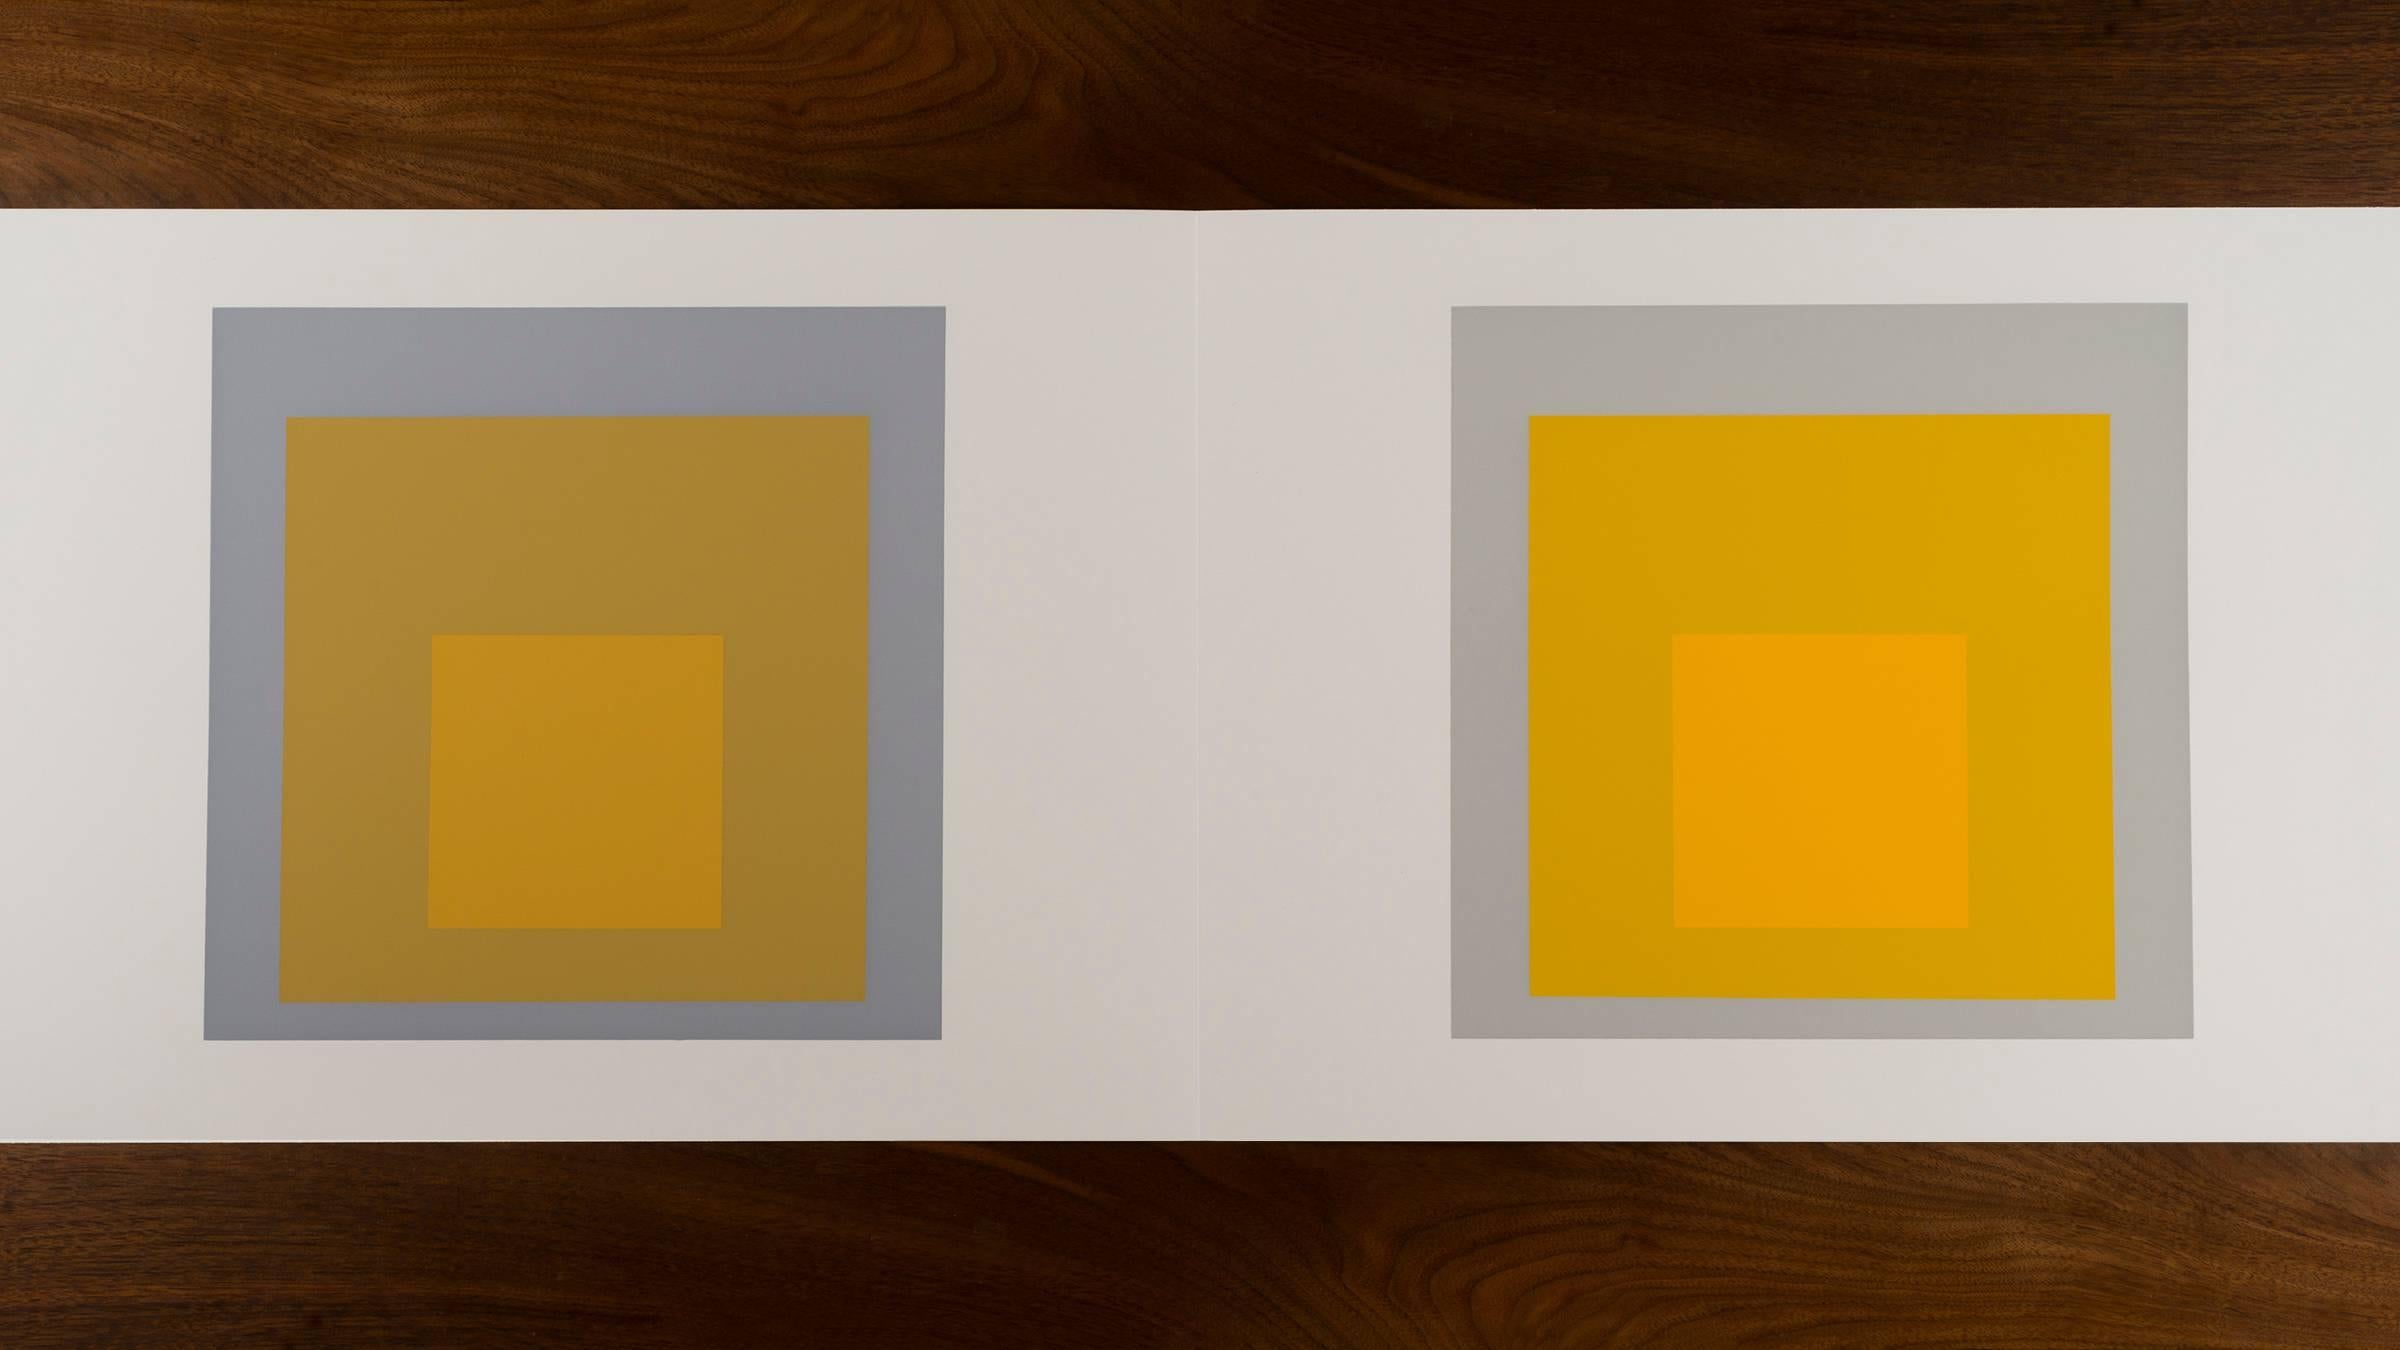 Josef Albers Formulations - Articulations I & II
Edition 974/ 1000
1972 screenprint on paper
Embossed with Josef Albers initials, portfolio and folder number. This work is published by Harry N. Abrams and Ives-Sillman. 
This work has never been